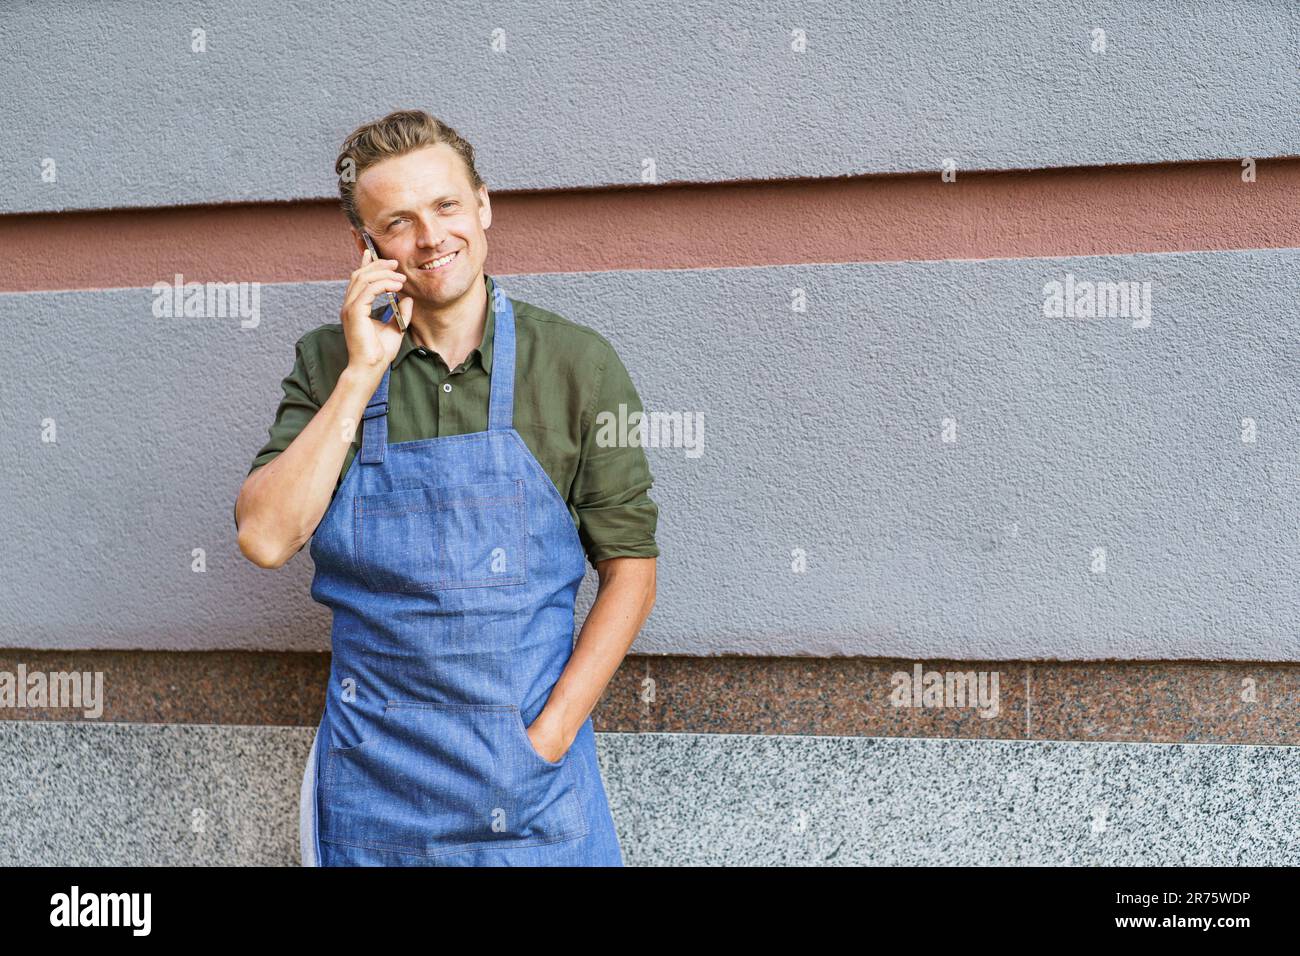 Concept of service readiness and the willingness to assist customers. Worker in blue apron, holding mobile phone, and ready to take order from client against wall background. High quality photo Stock Photo